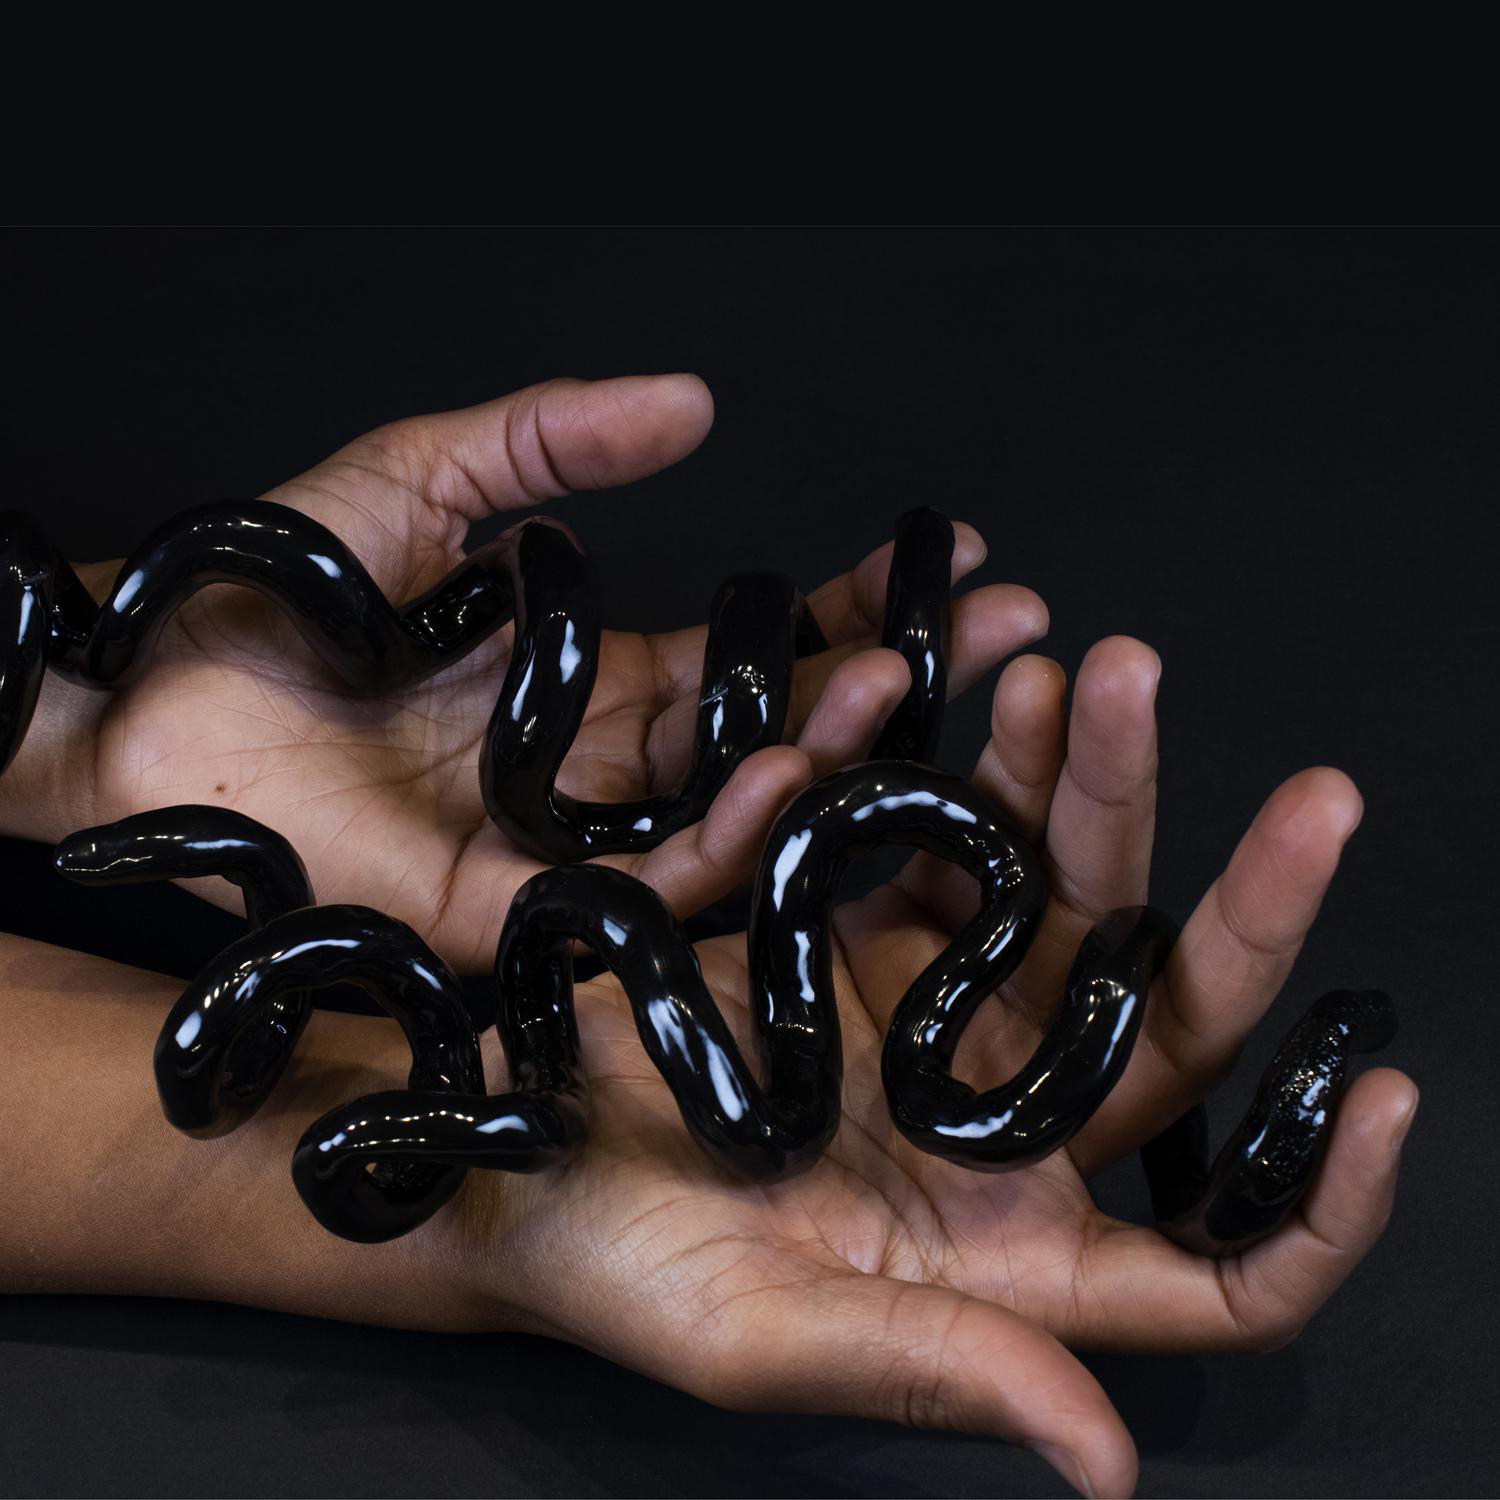 A pair of brown hands cradle shiny black squiggles that curl around fingers against a black background